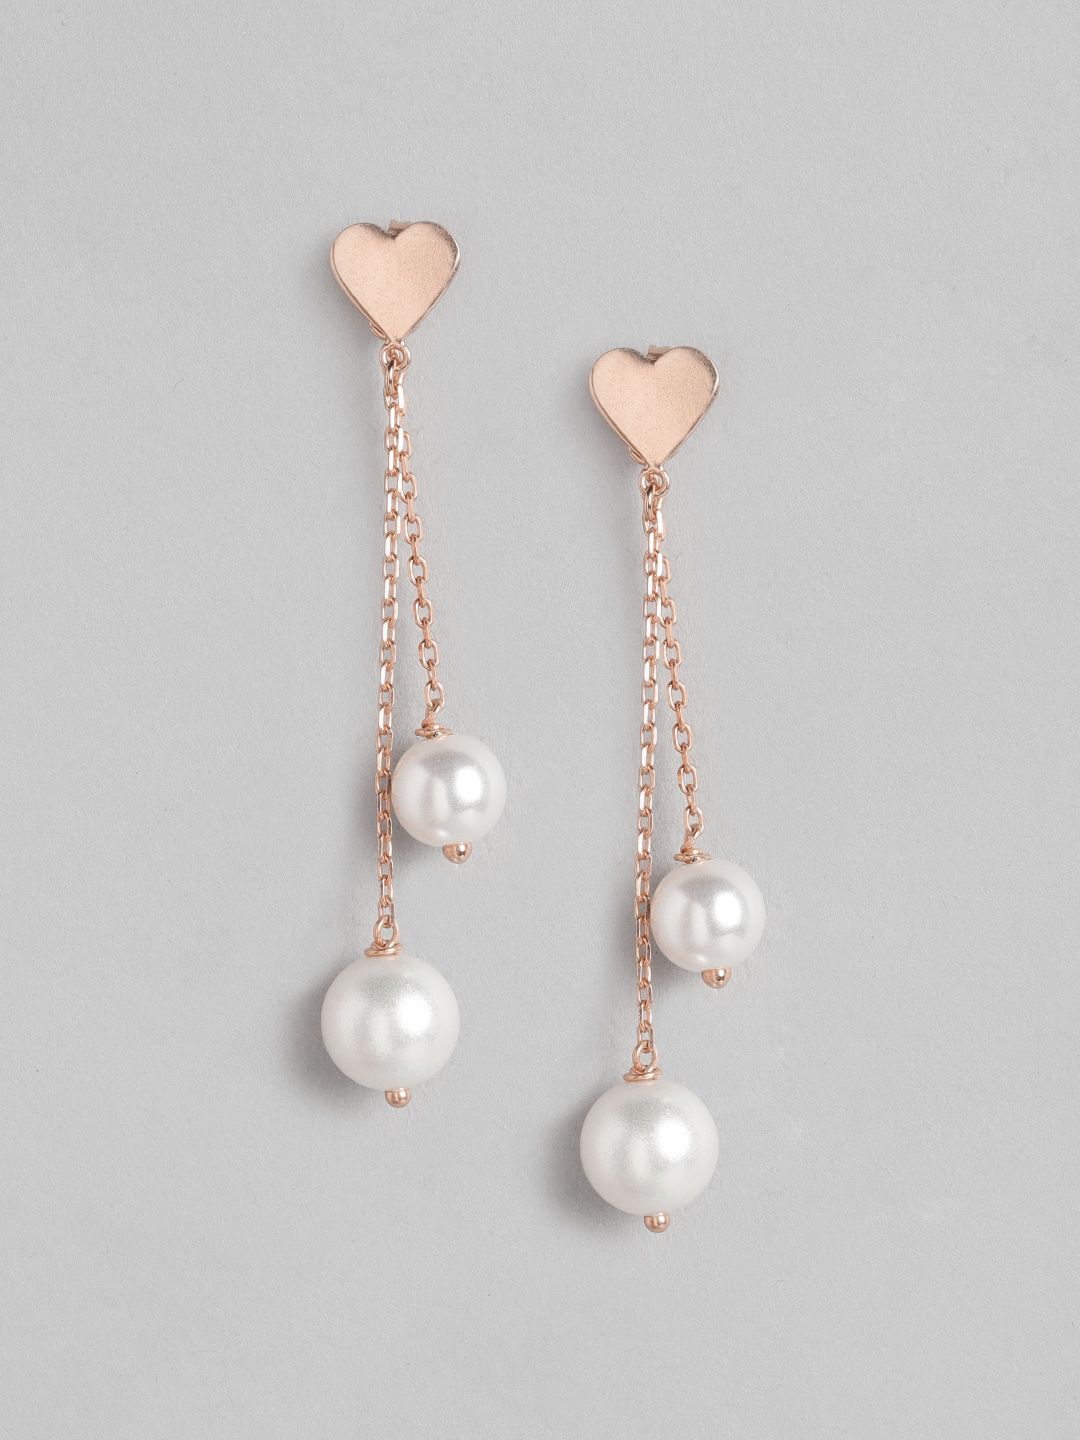 Carlton London Rose Gold & White Contemporary Drop Earrings Price in India